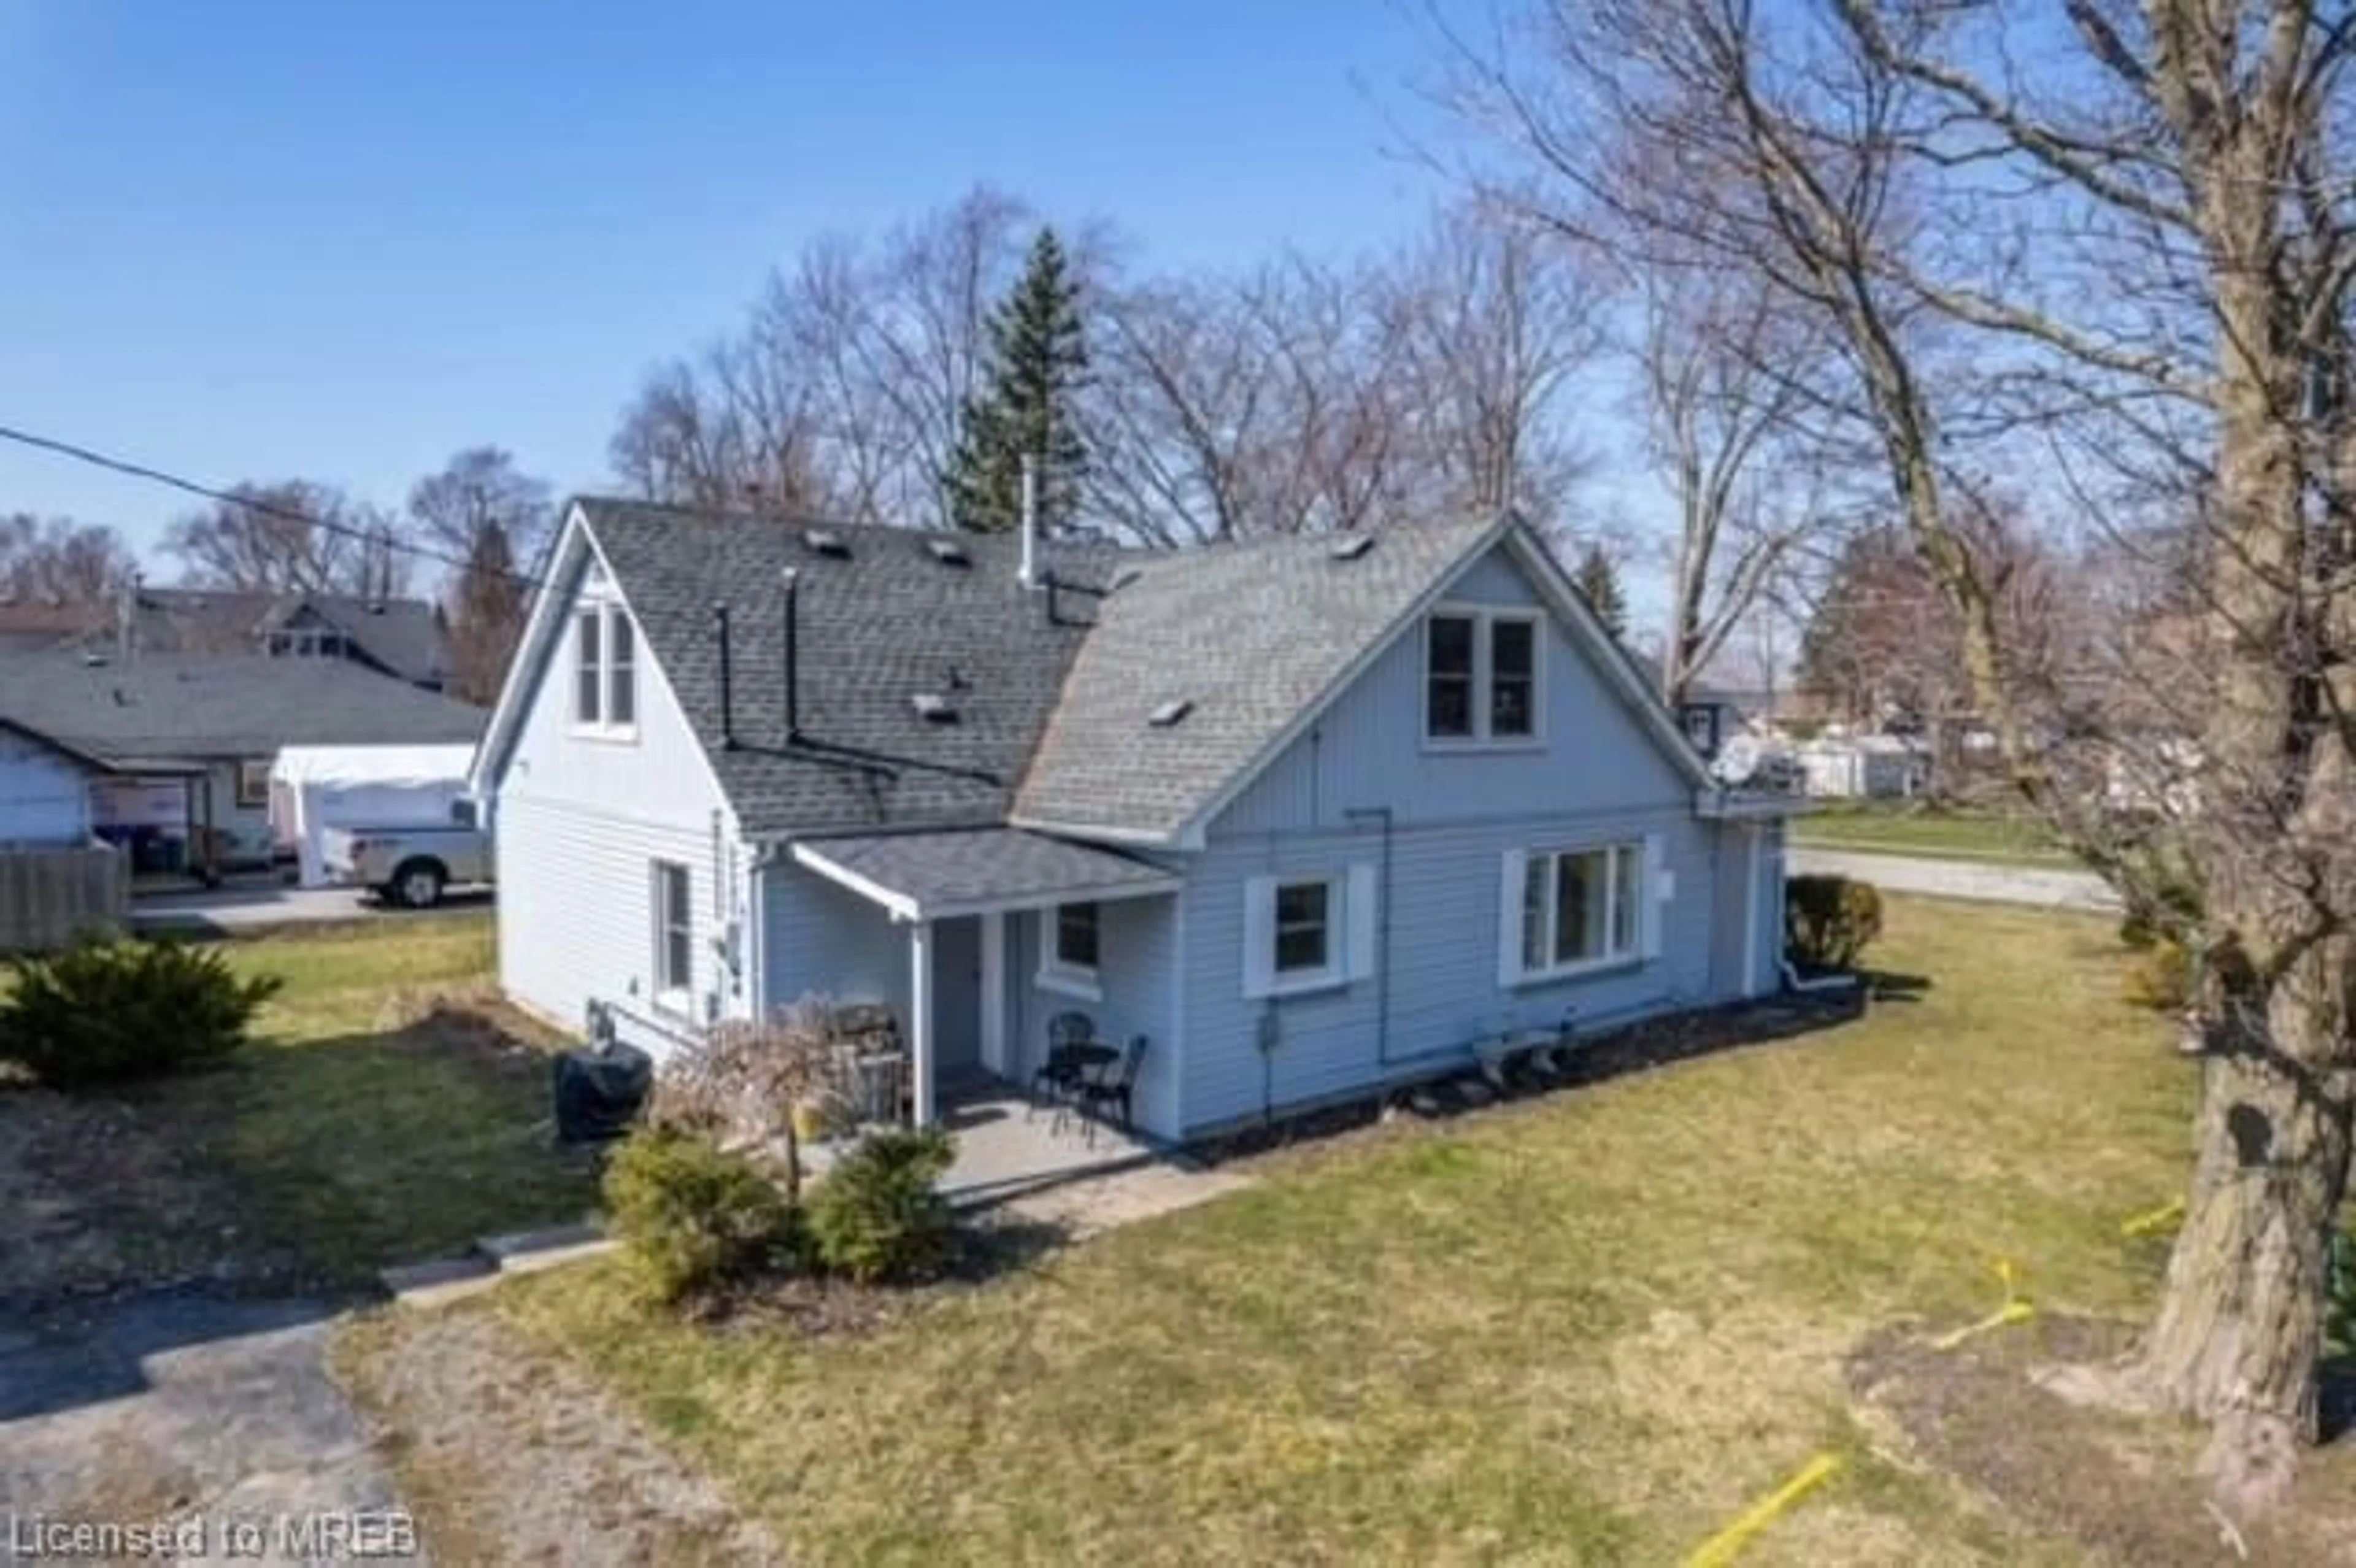 Frontside or backside of a home for 3807 Elm St, Ridgeway Ontario L0S 1N0